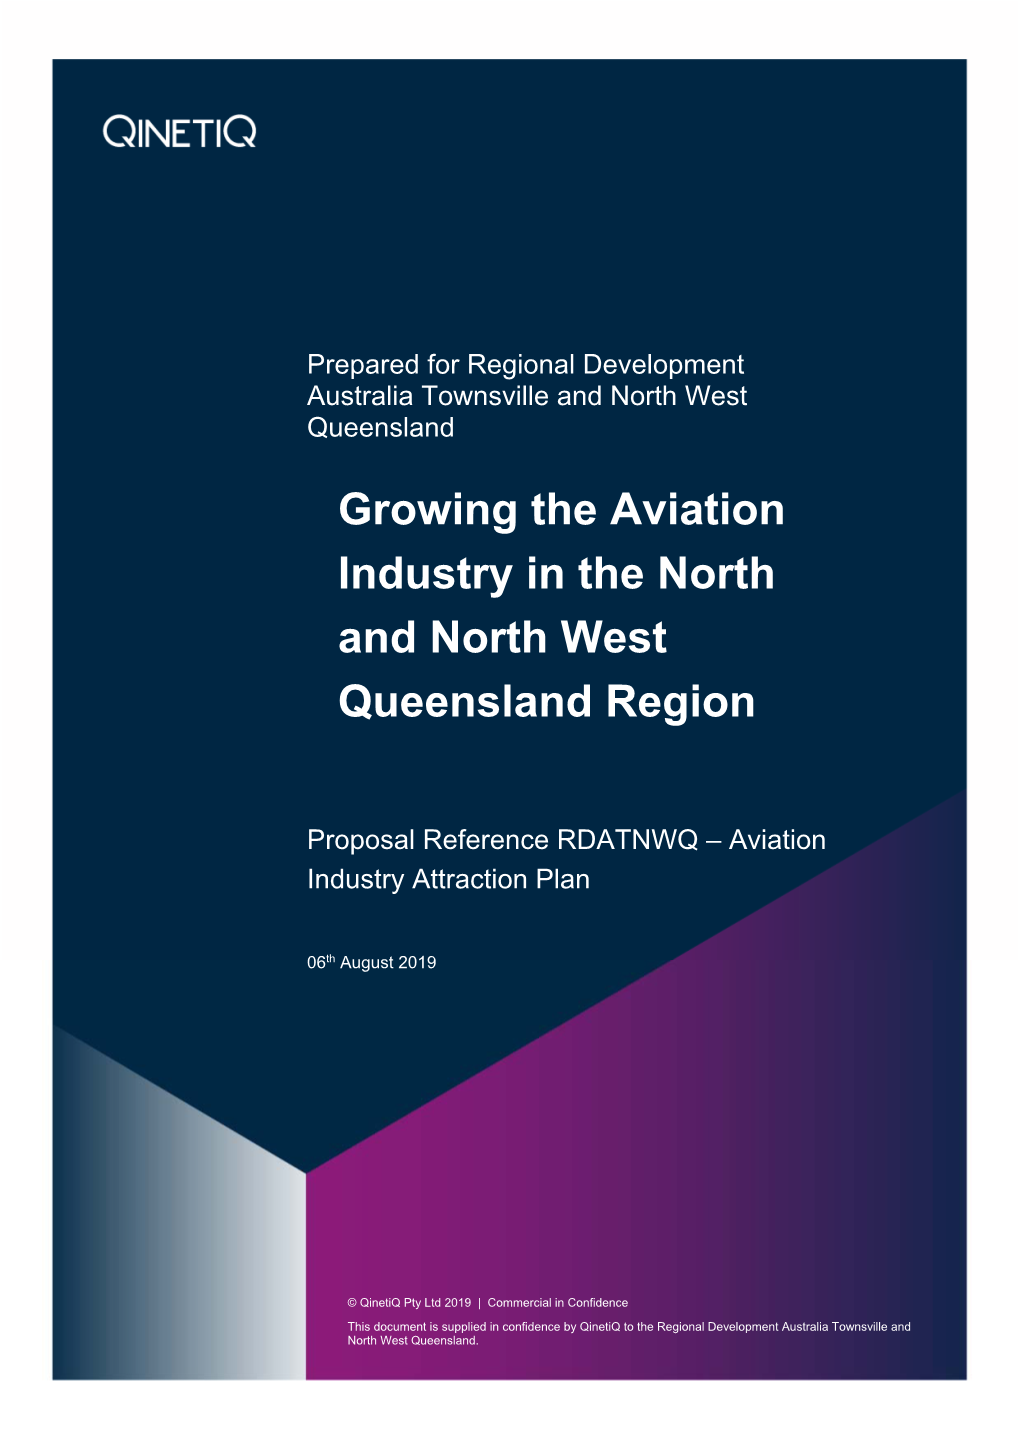 Growing the Aviation Industry in the North and North West Queensland Region